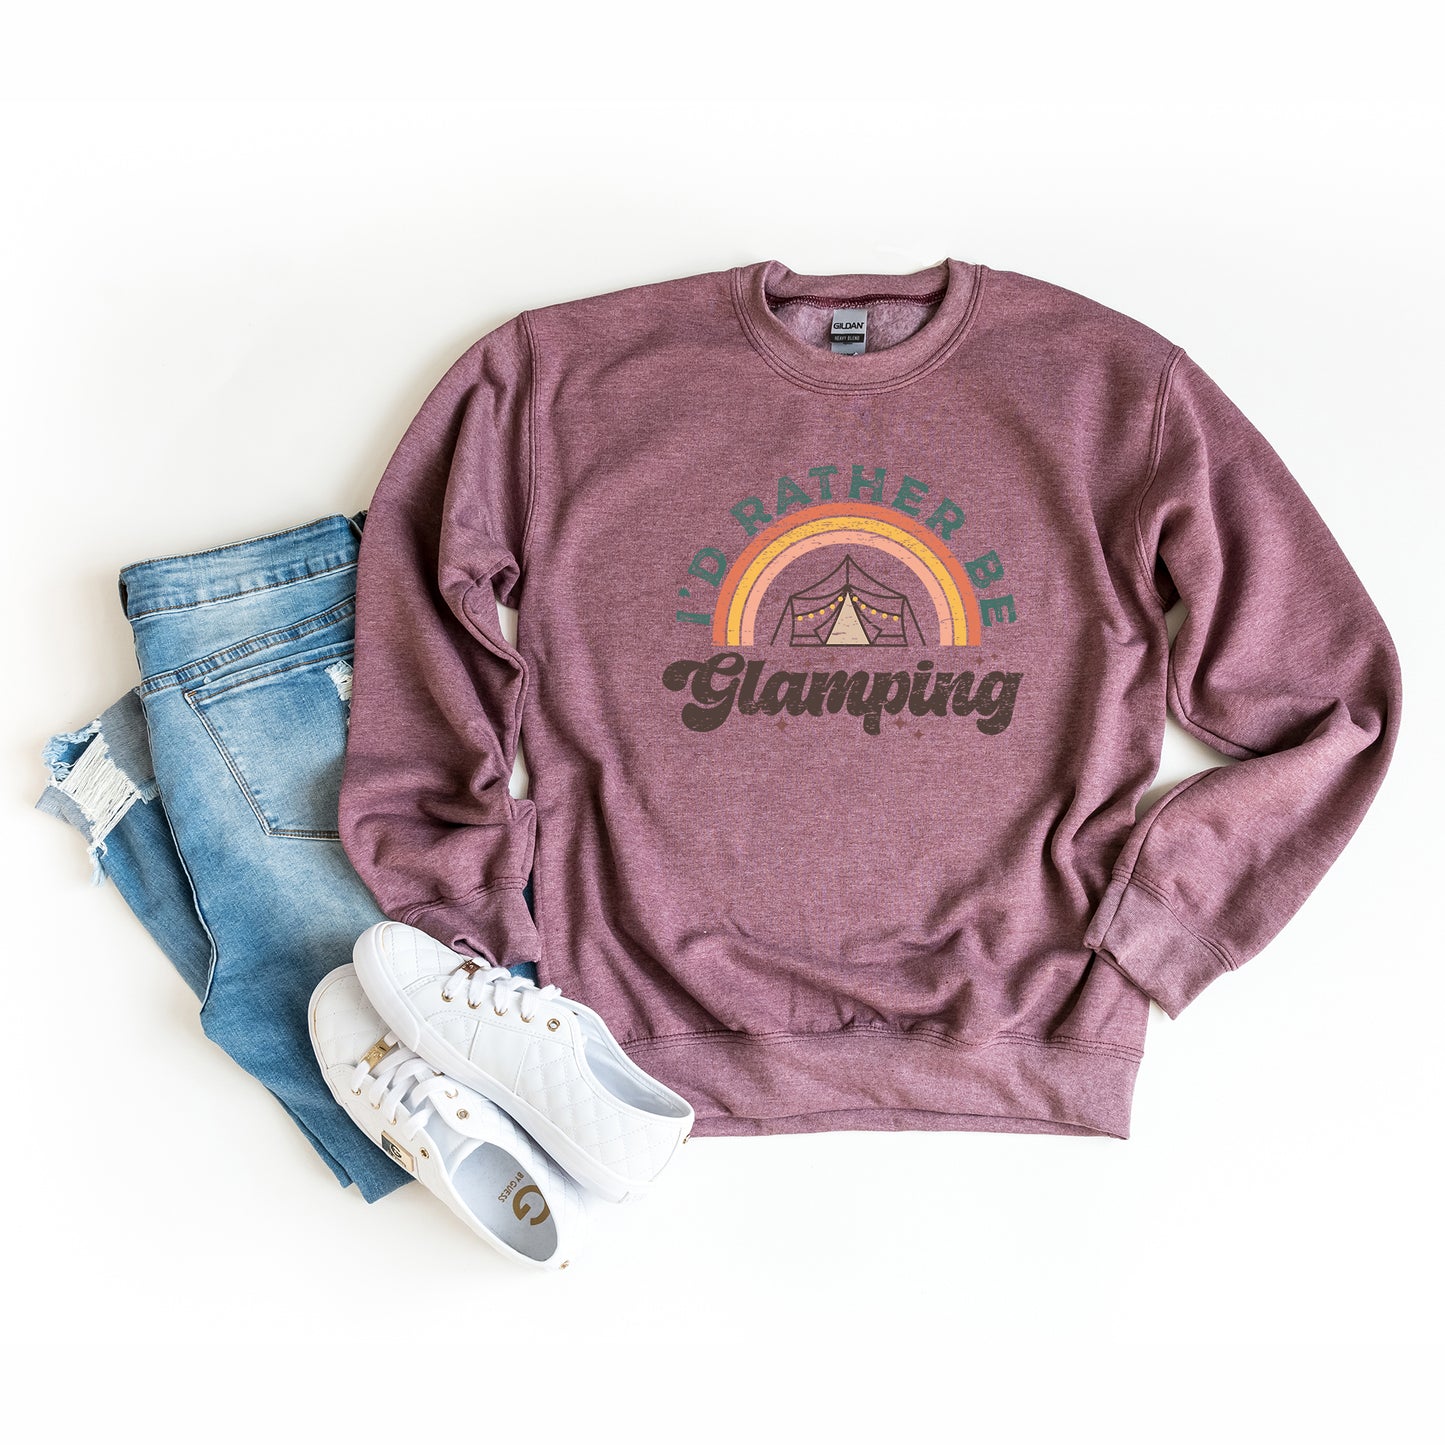 I'd Rather Be Glamping | Sweatshirt